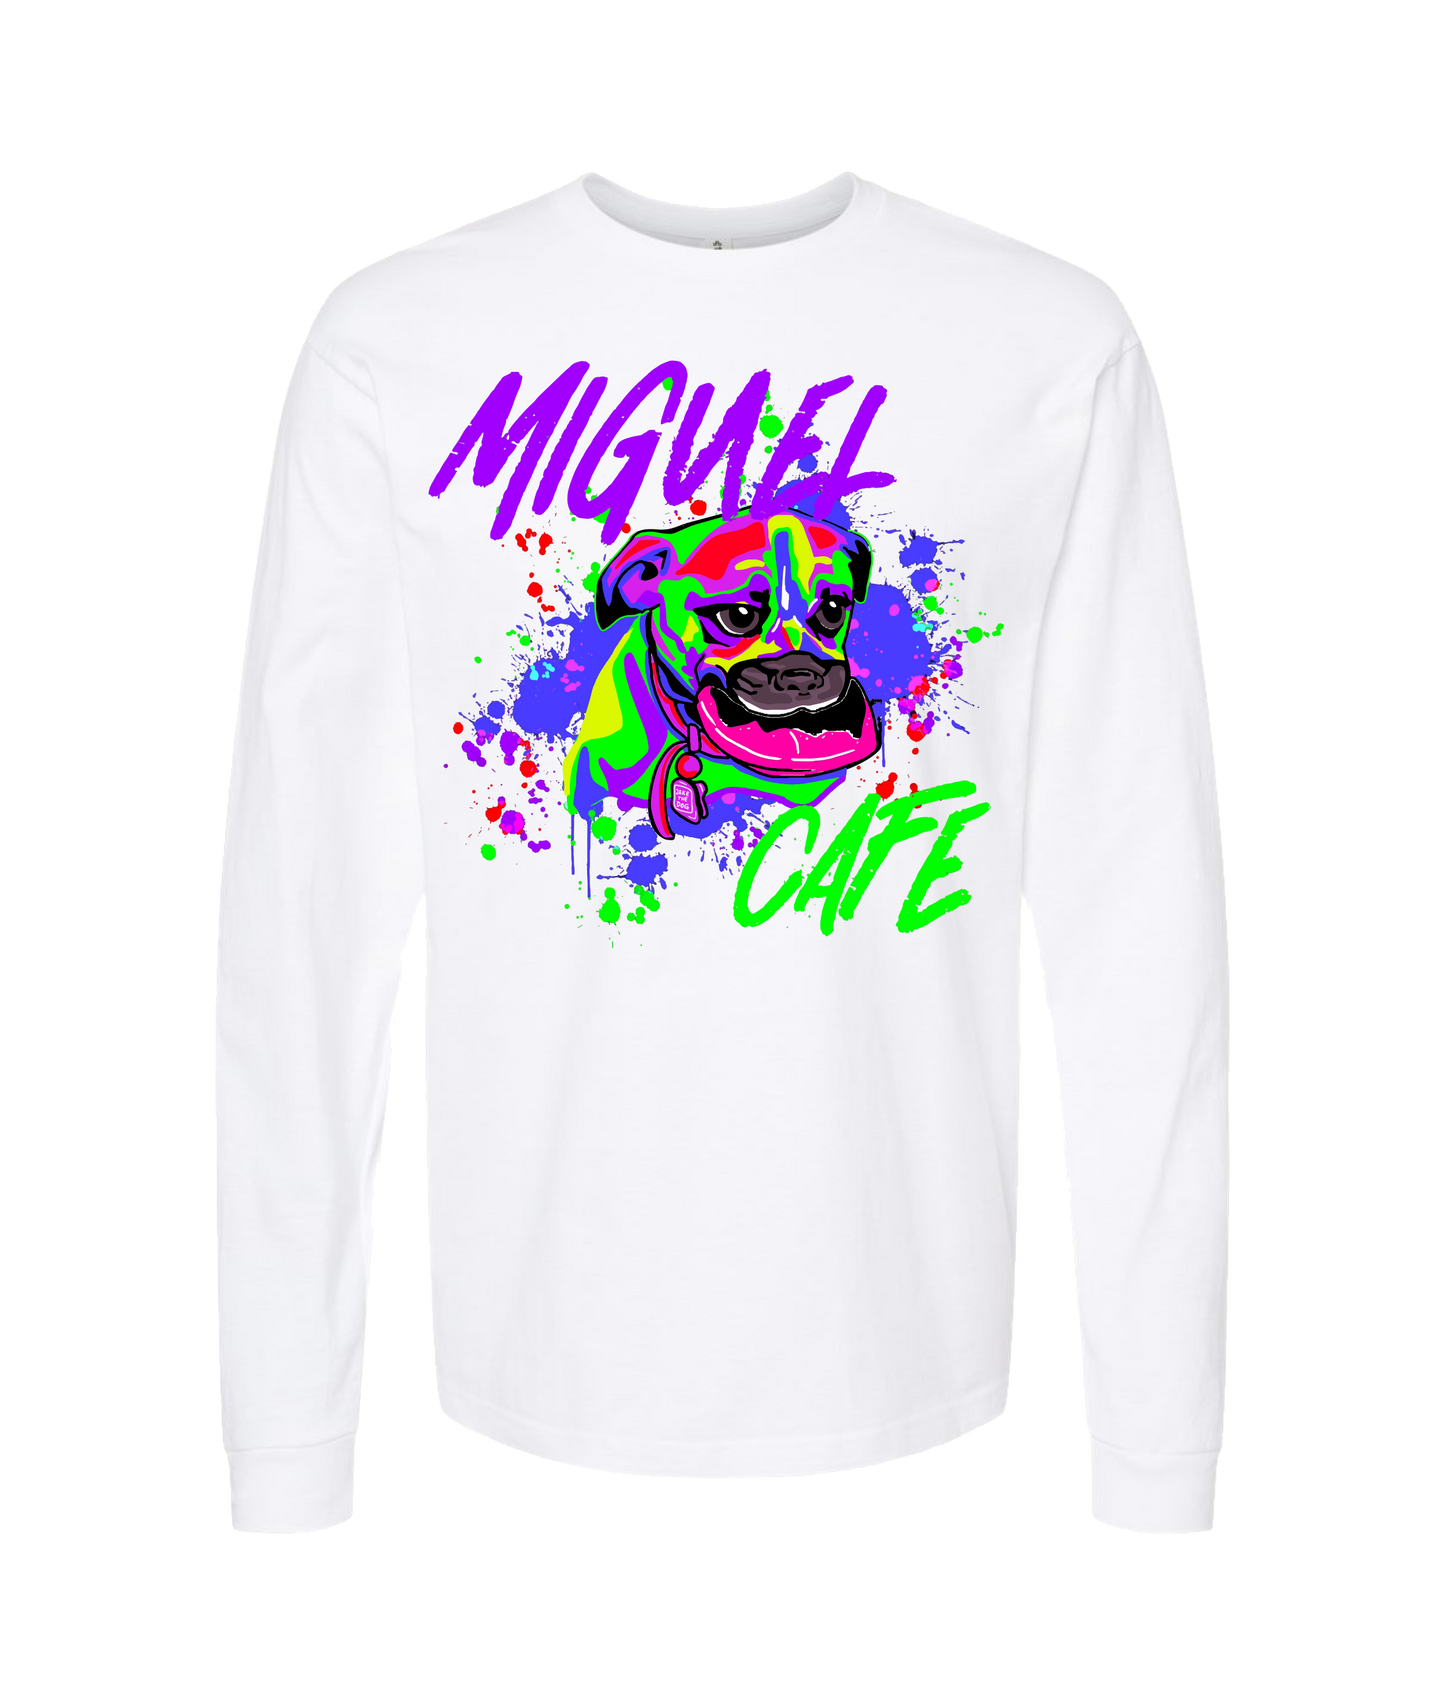 Miguel Cafe music - DOG - White Long Sleeve T